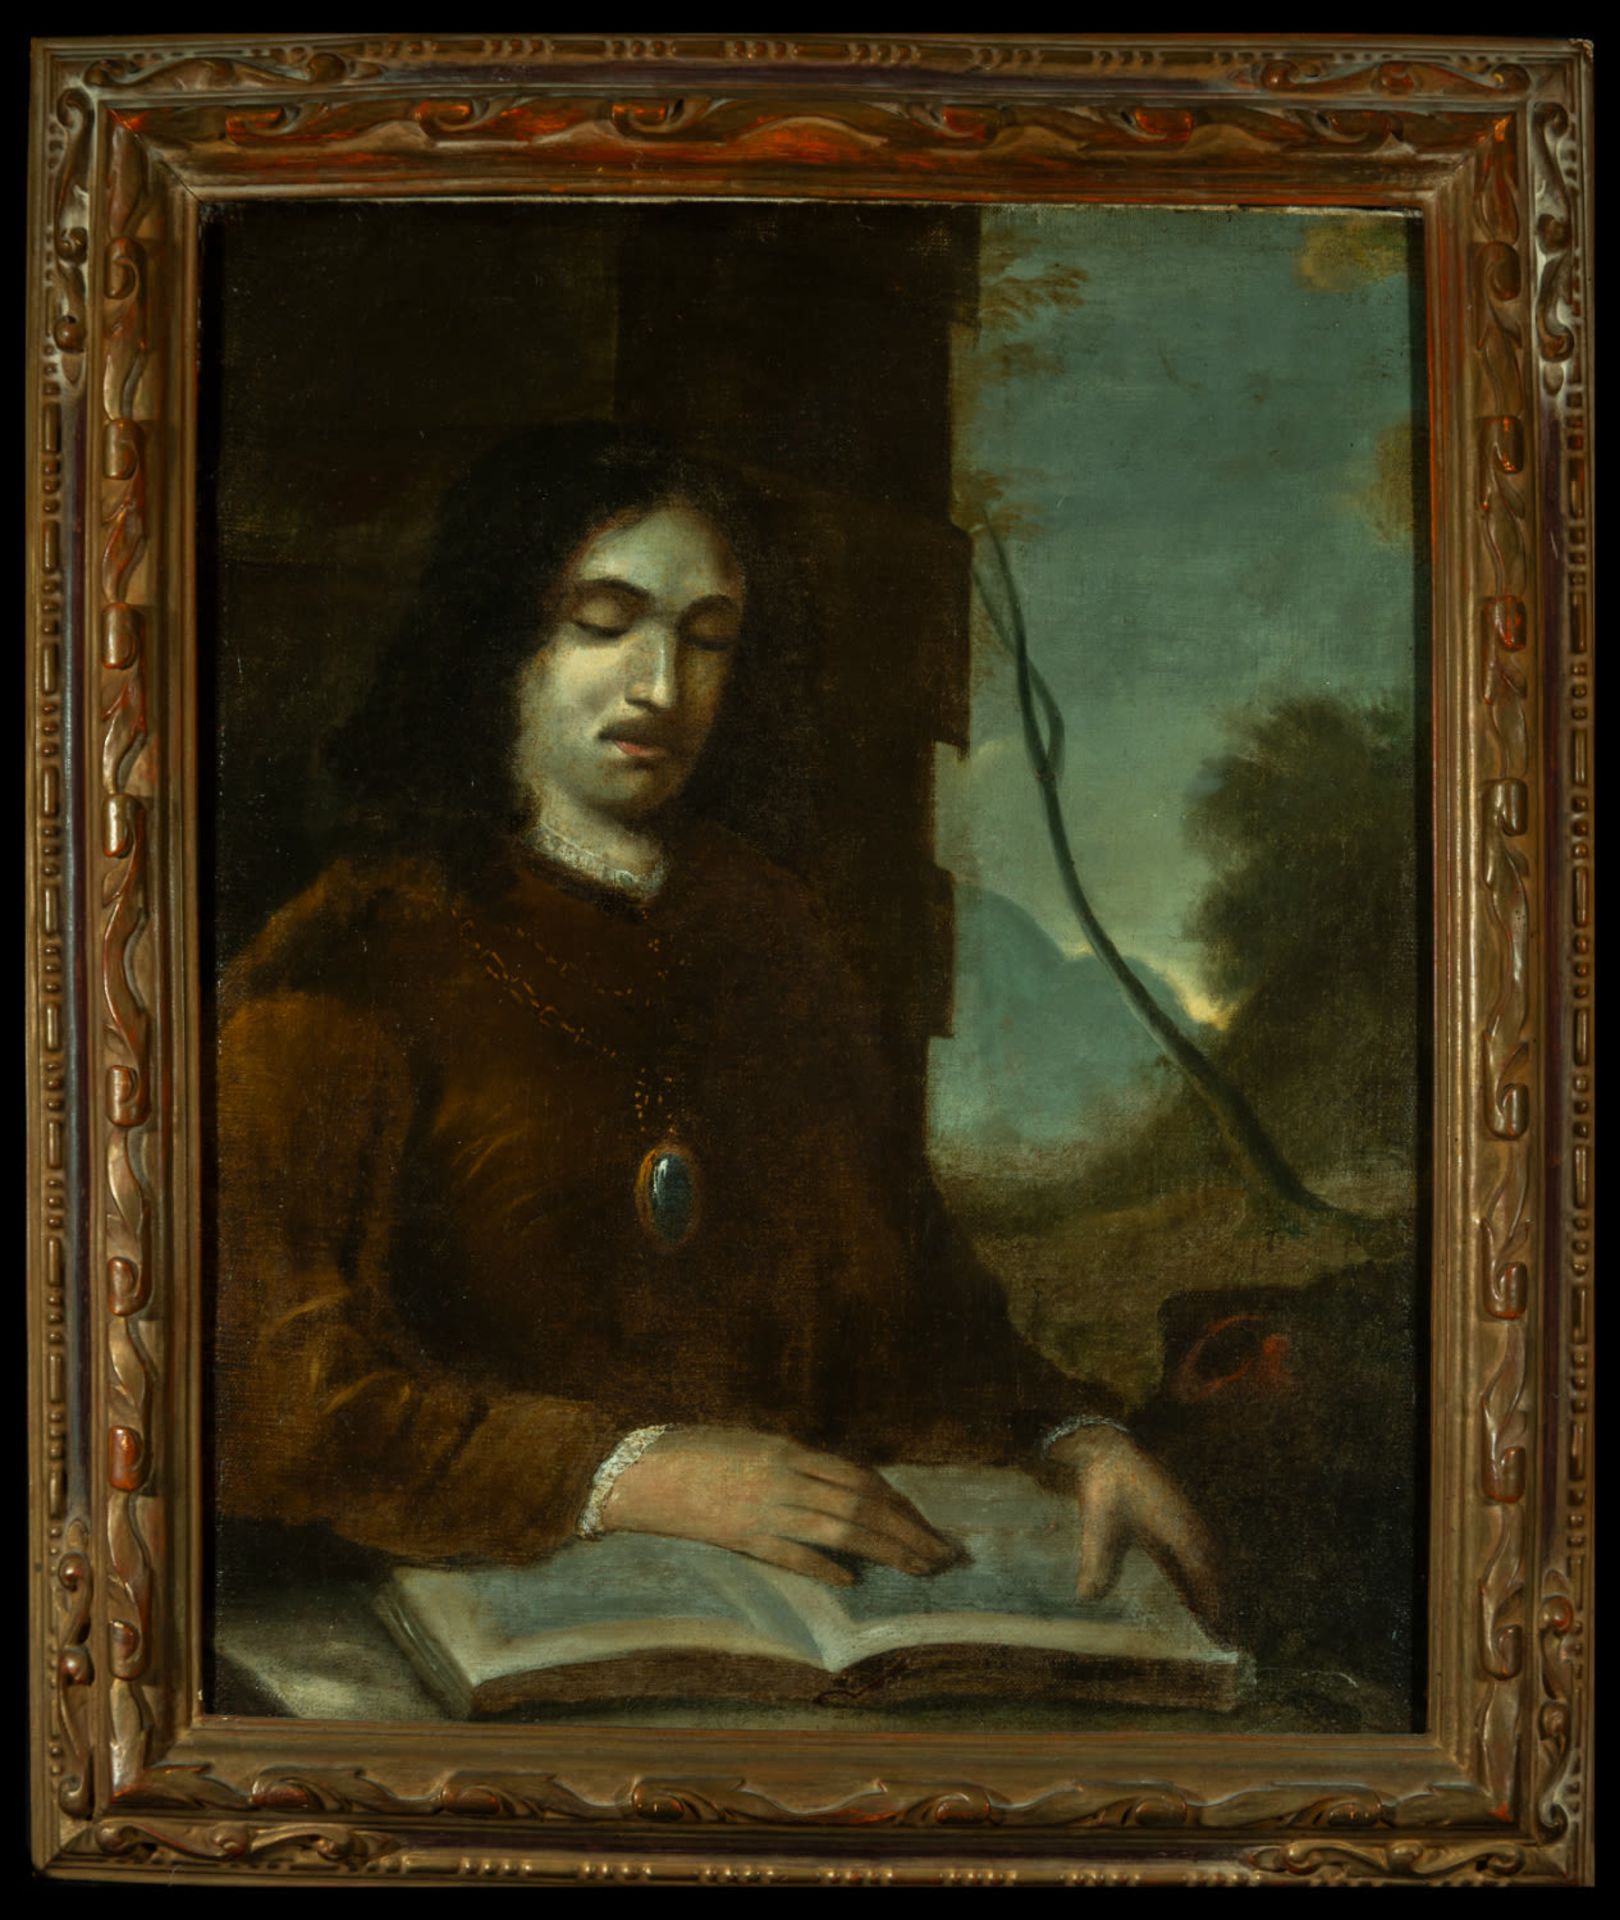 Half-length portrait of Noble Knight reading, old Spanish-Flemish school of the 17th century